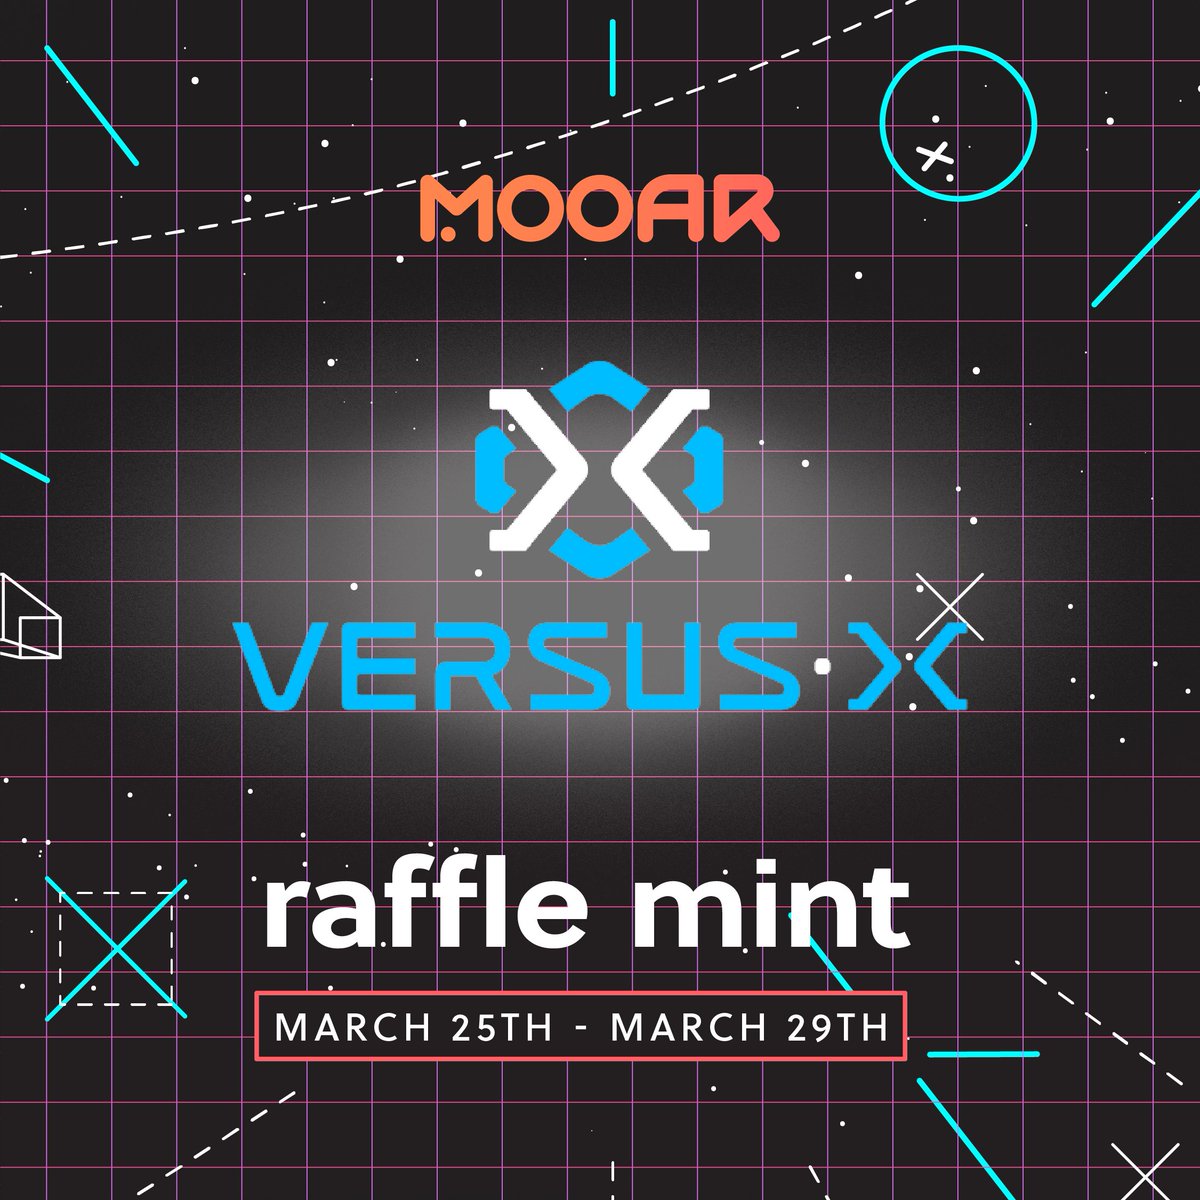 #MOOAR partners up with @PlayVersus_X 😺 🎱 Versus-X is a blockchain-based sports game with a focus on realism & skill-based wagering. It offers PvE, PvP & tournaments, enabling players to earn through gameplay. The VSX token enhances community engagement & rewards [1/4]